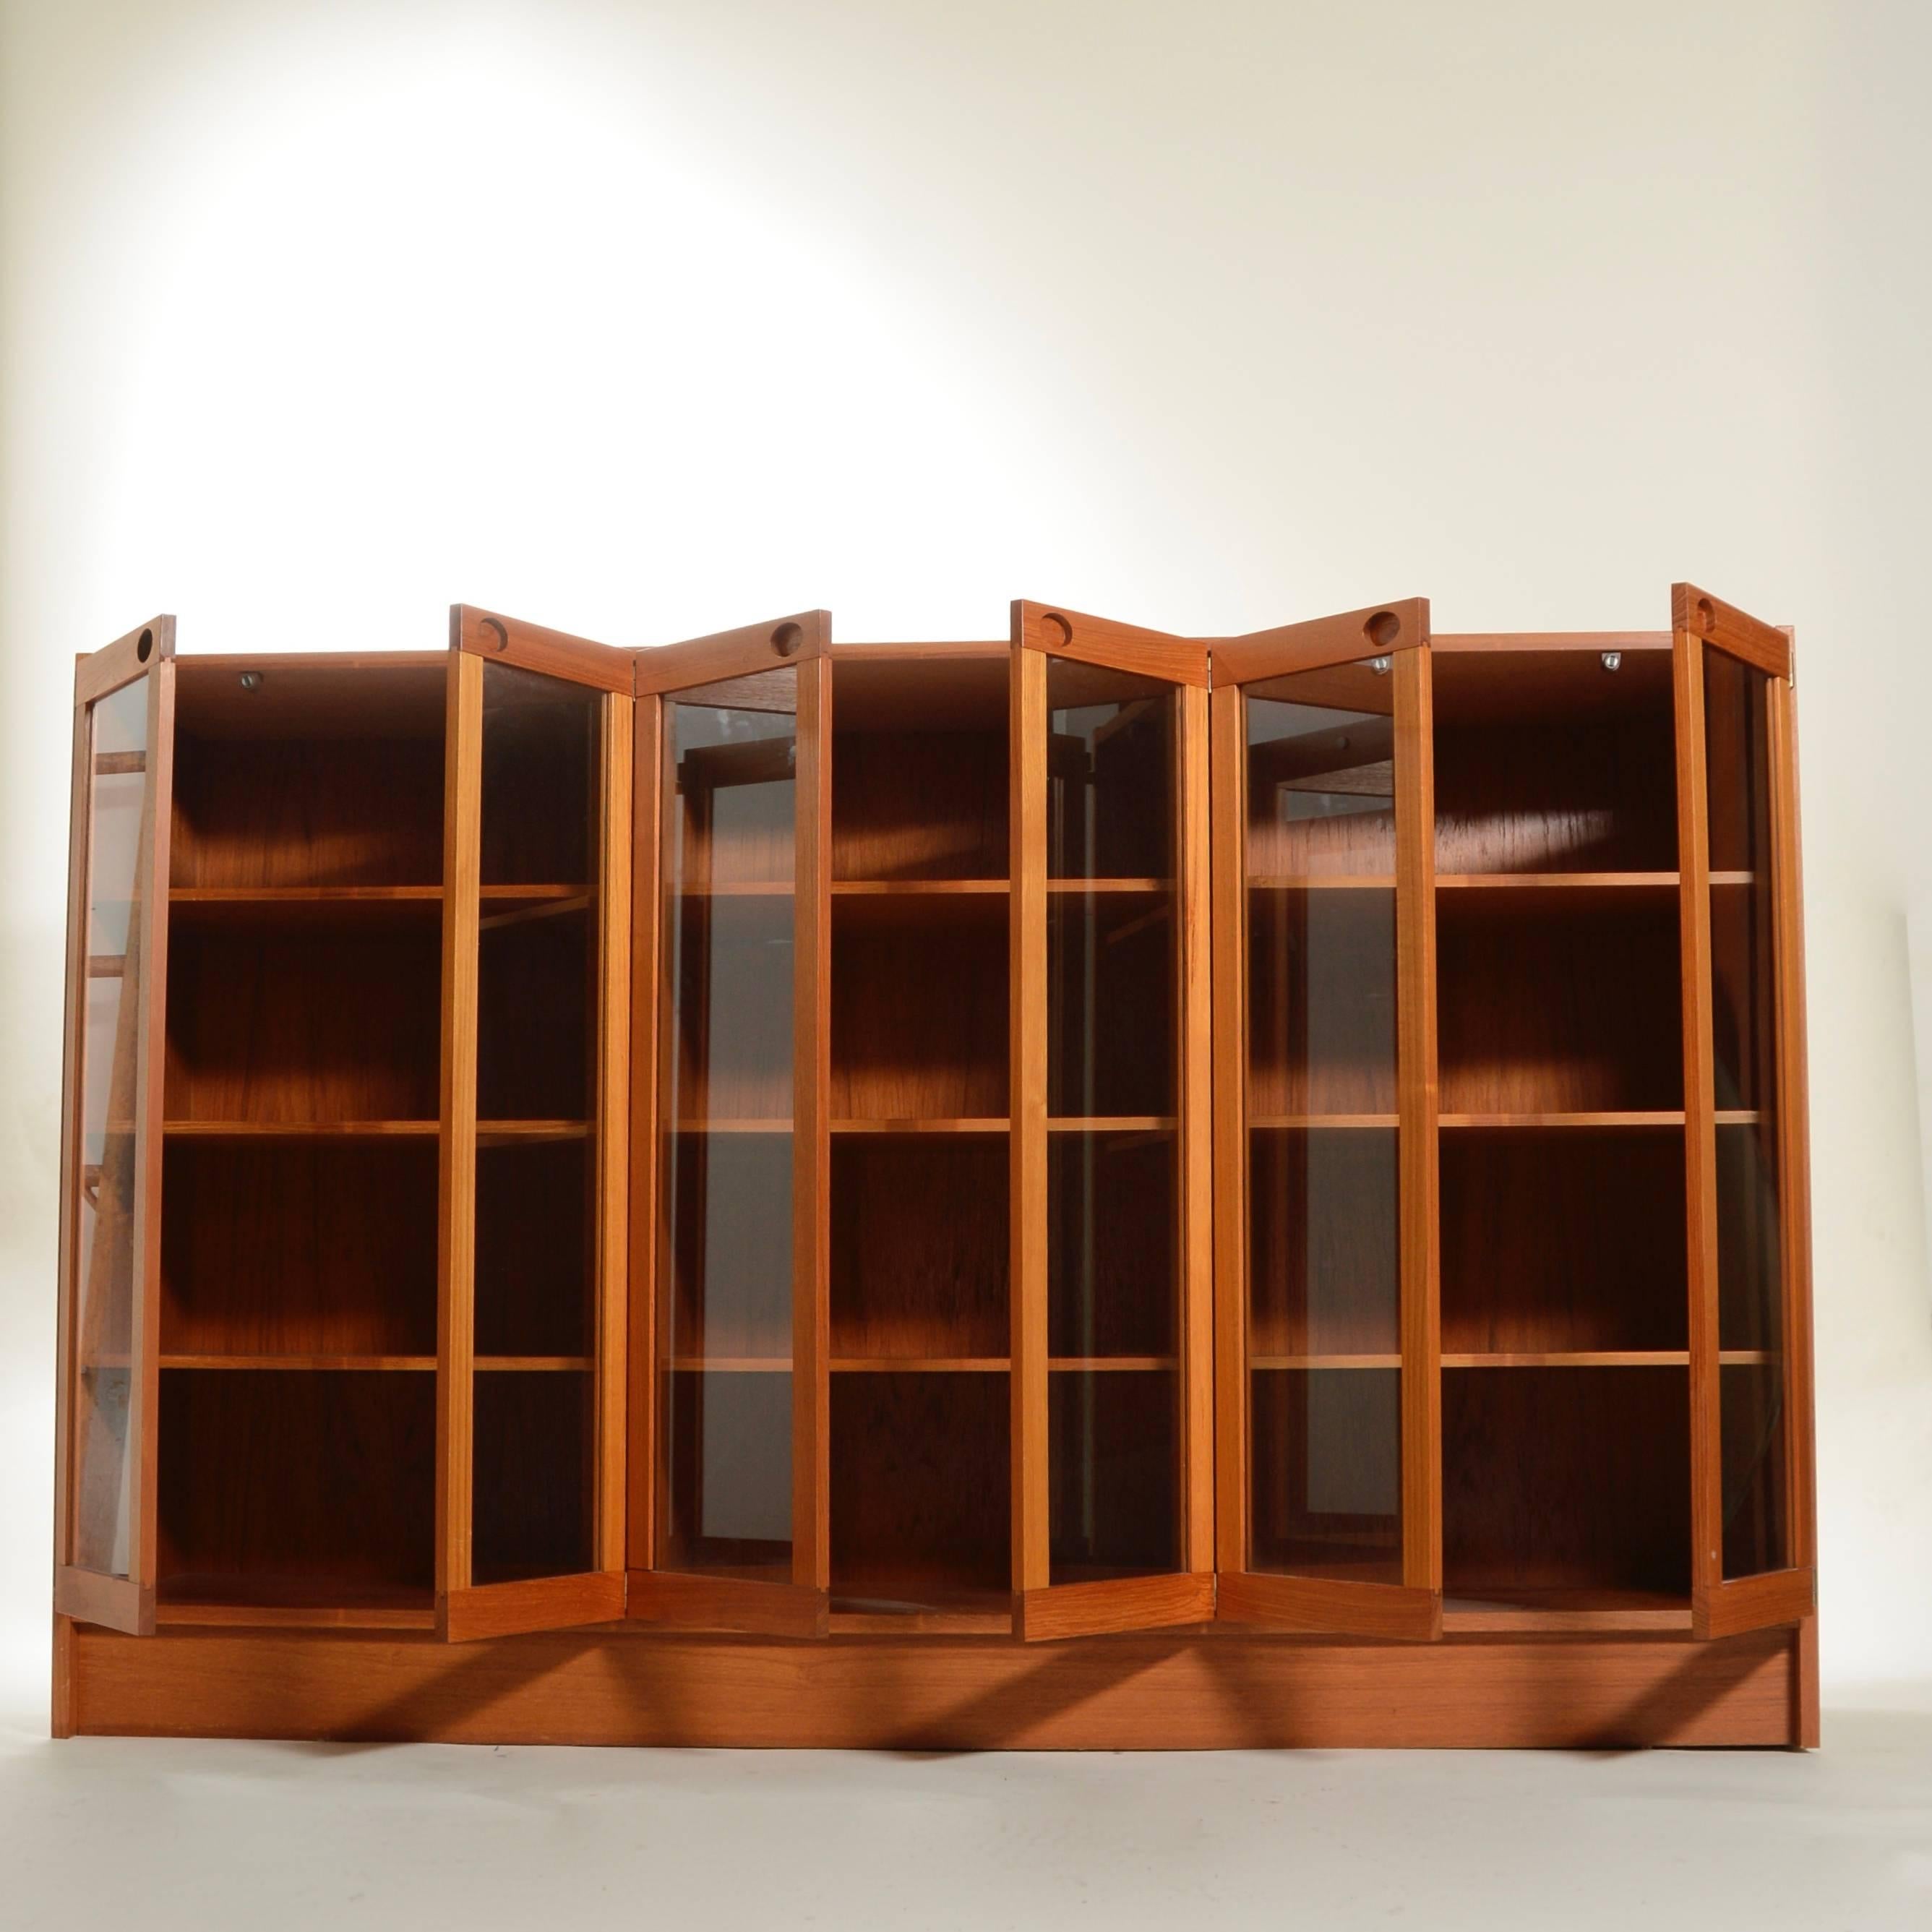 This beautiful Danish teak cabinet makes a stylish storage option for any room. Spacious and fully adjustable offering a nice variety of organizational space. 
In excellent condition.